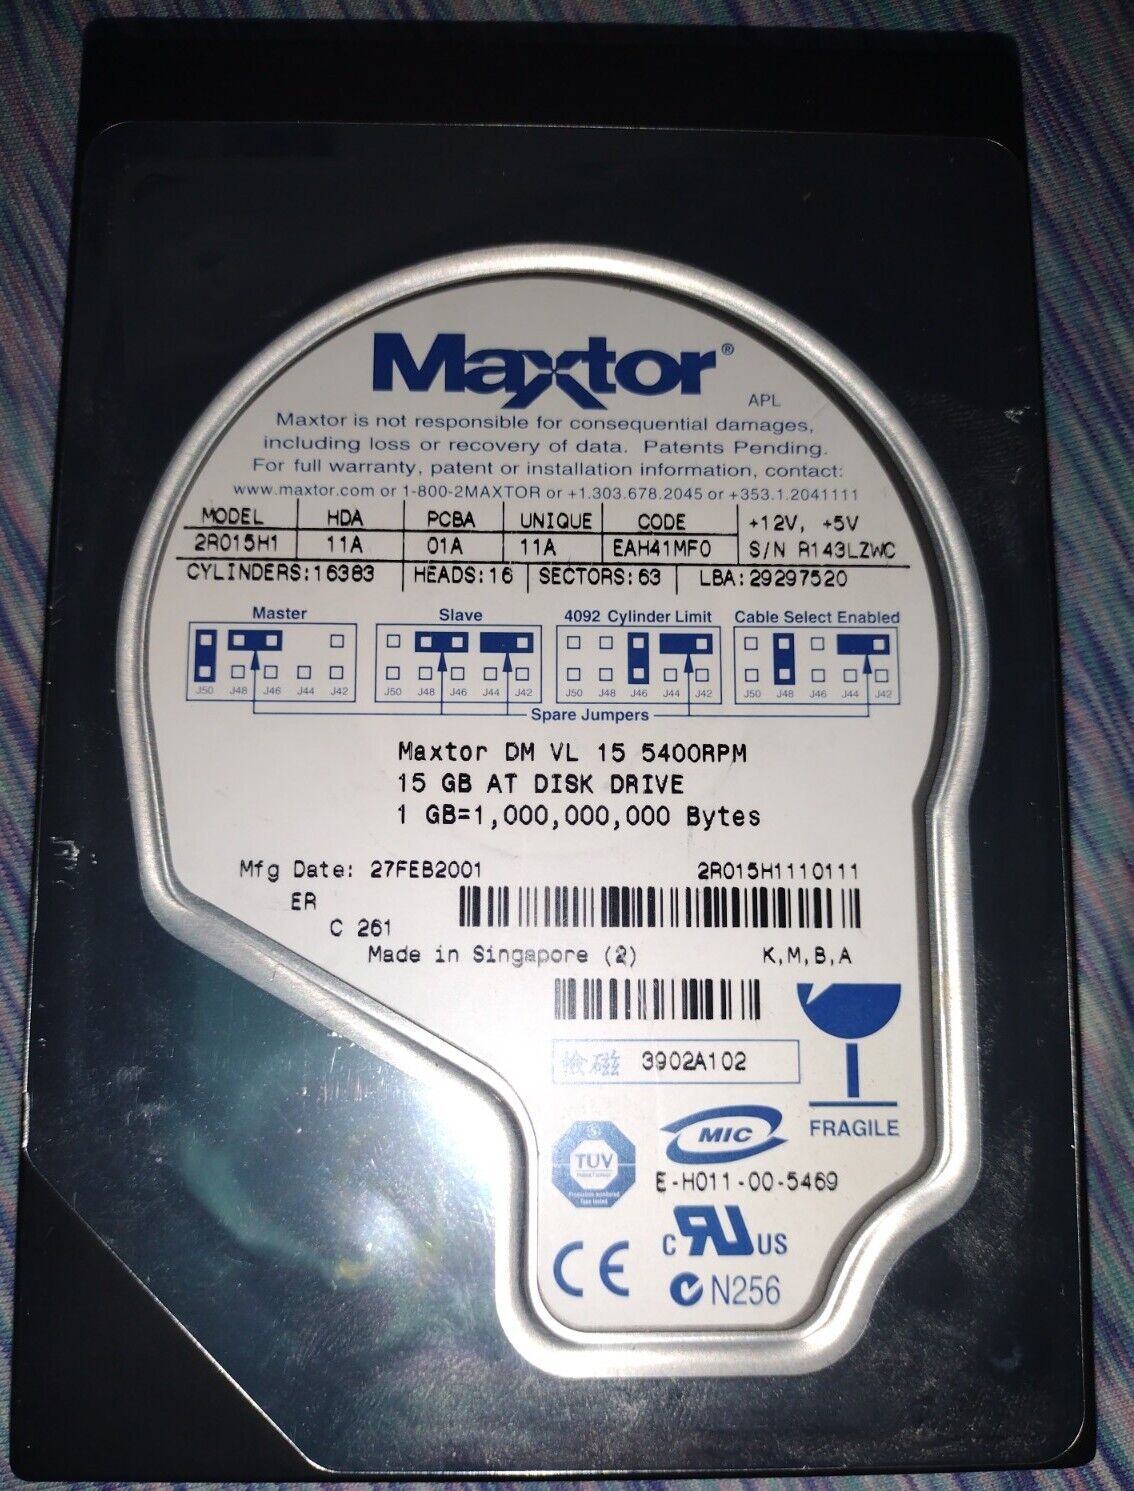 Vintage Maxtor 2R015H1 Hard Drive - 15GB 5400RPM - Formatted And Wiped Clean. 